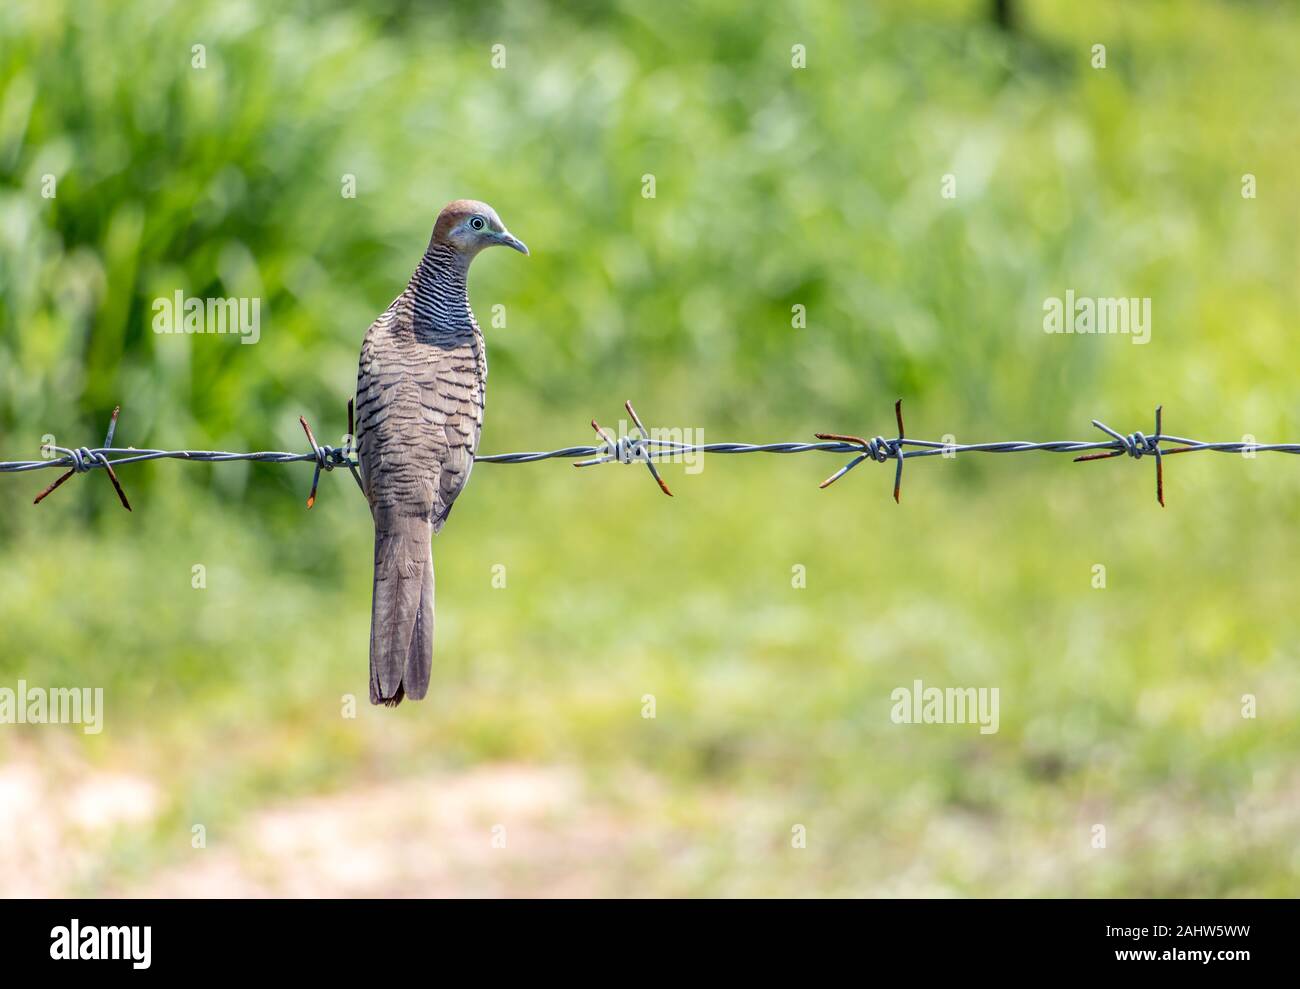 A pigeon sitting on barbed wire. Zebra dove sits on fence from wire with  thorns, green background Stock Photo - Alamy